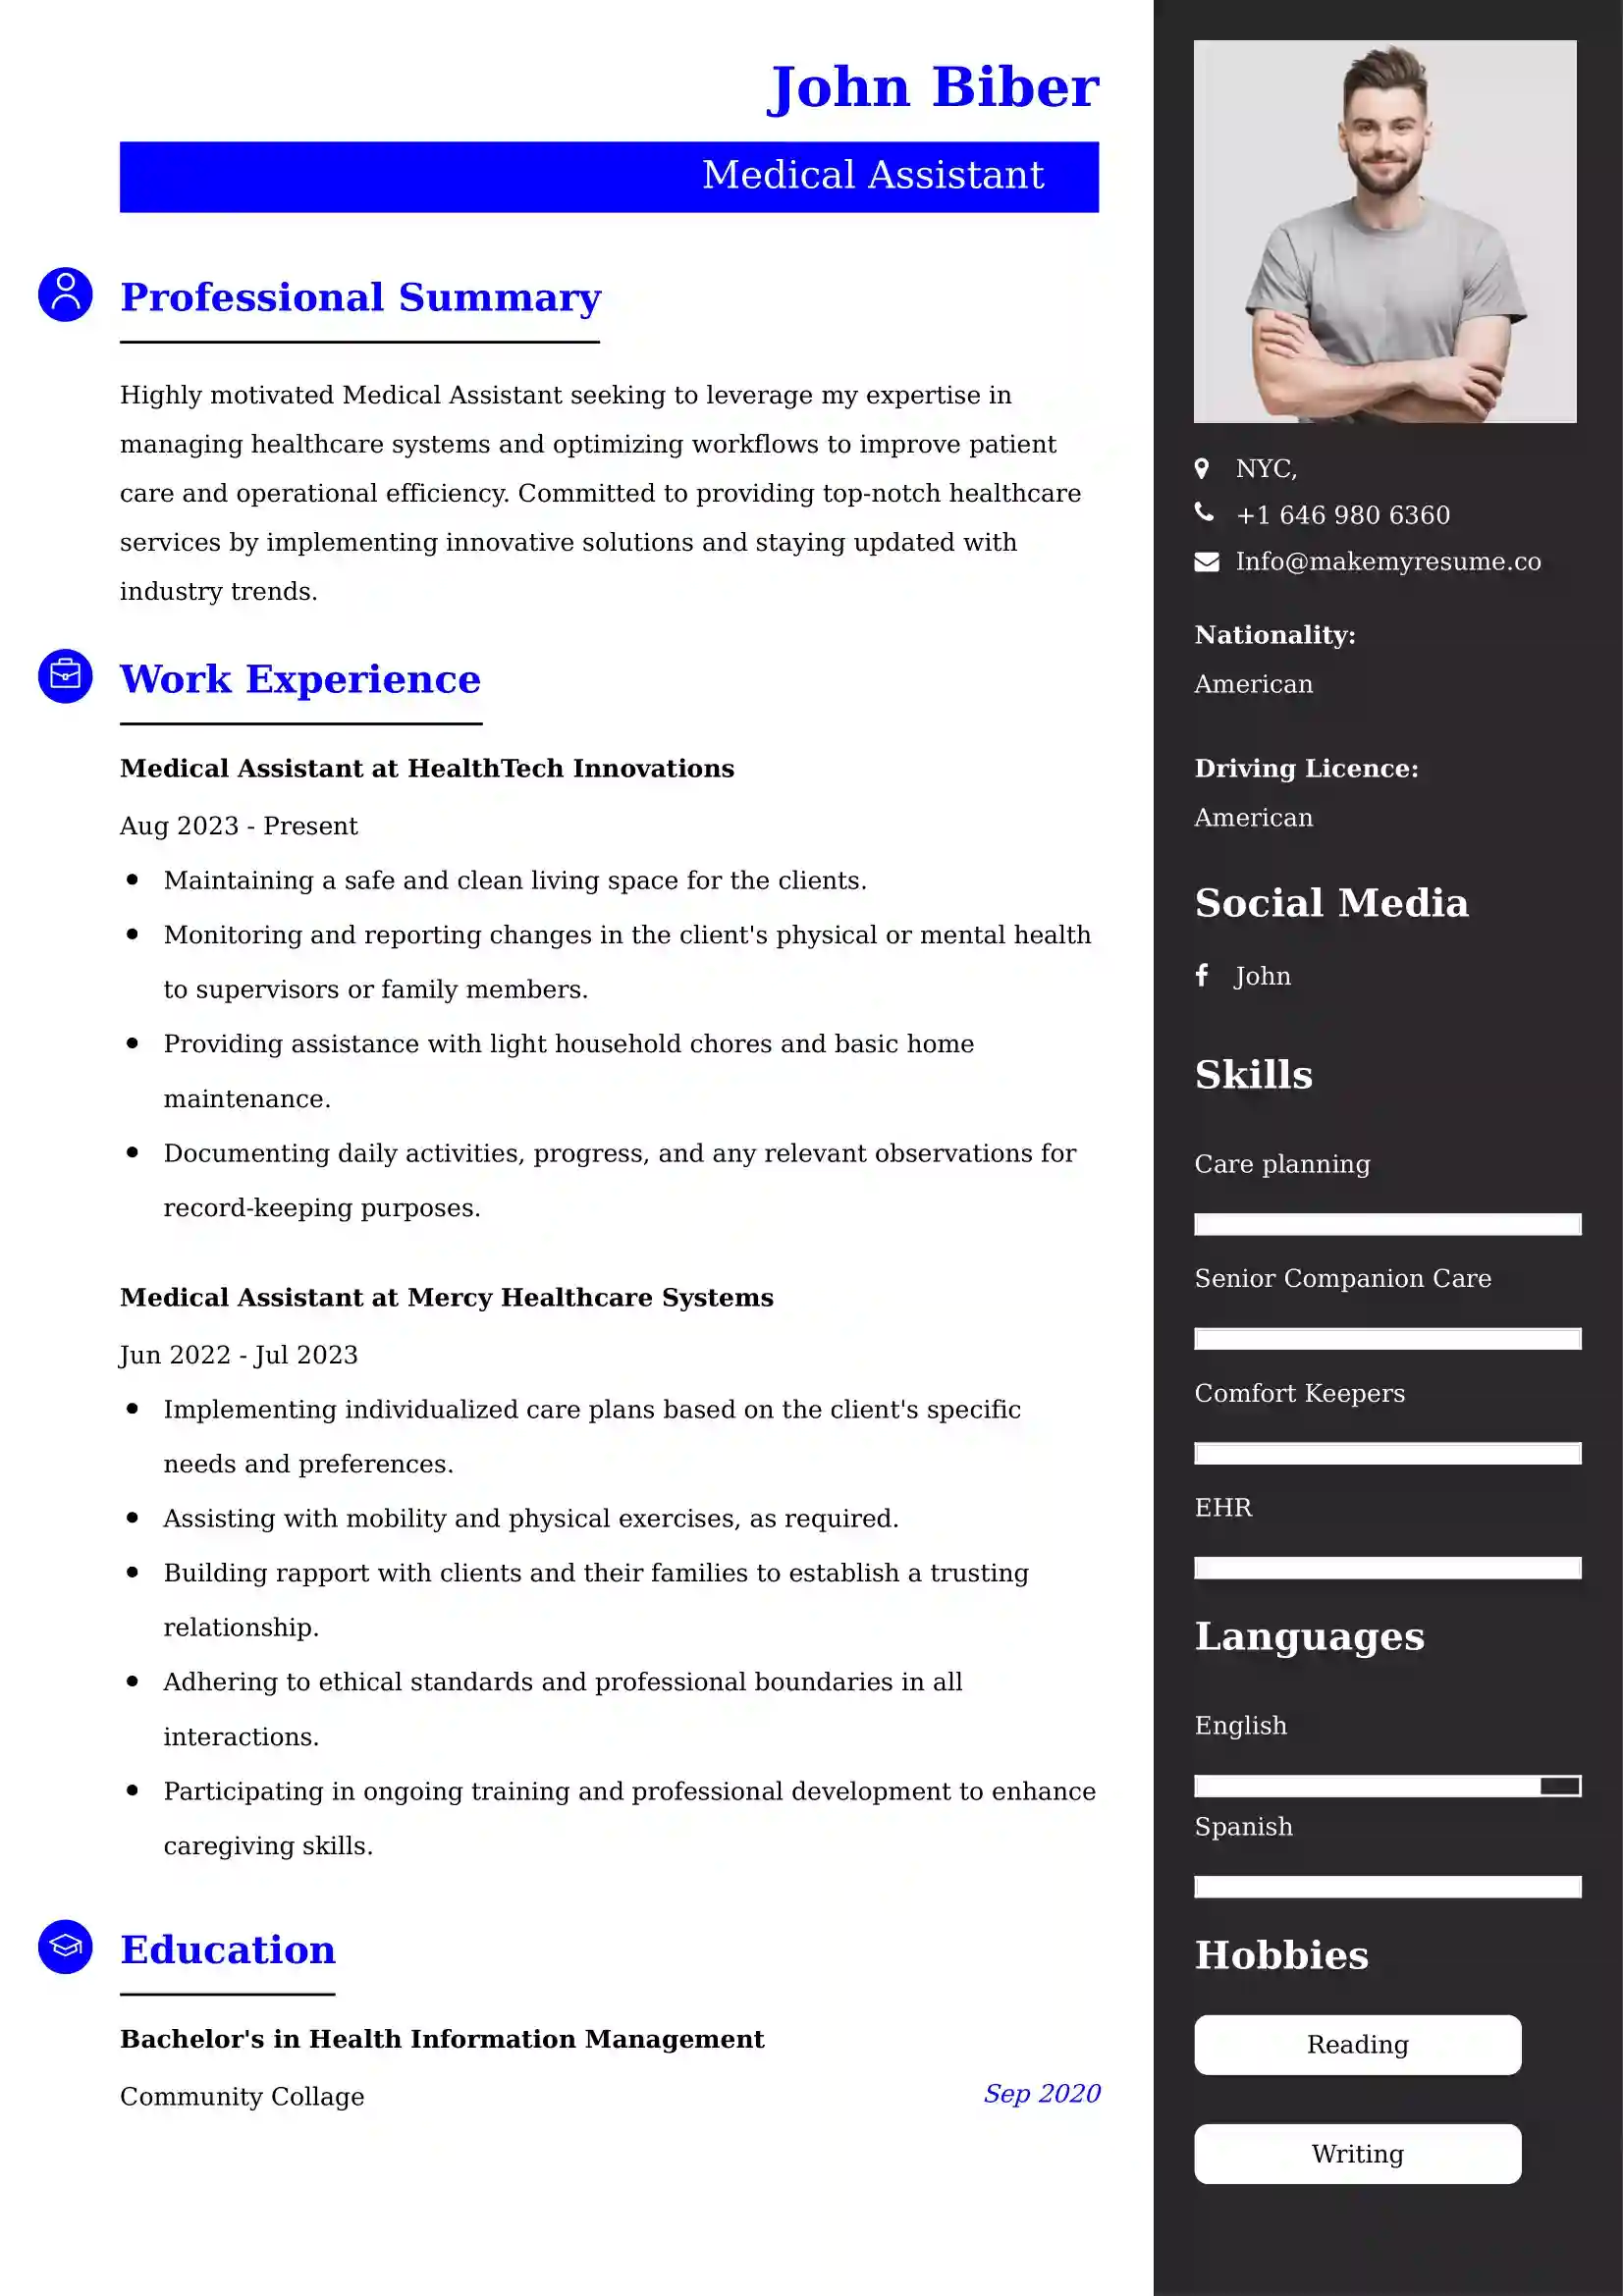 Medical Assistant Resume Examples for UK Jobs - Tips and Guide